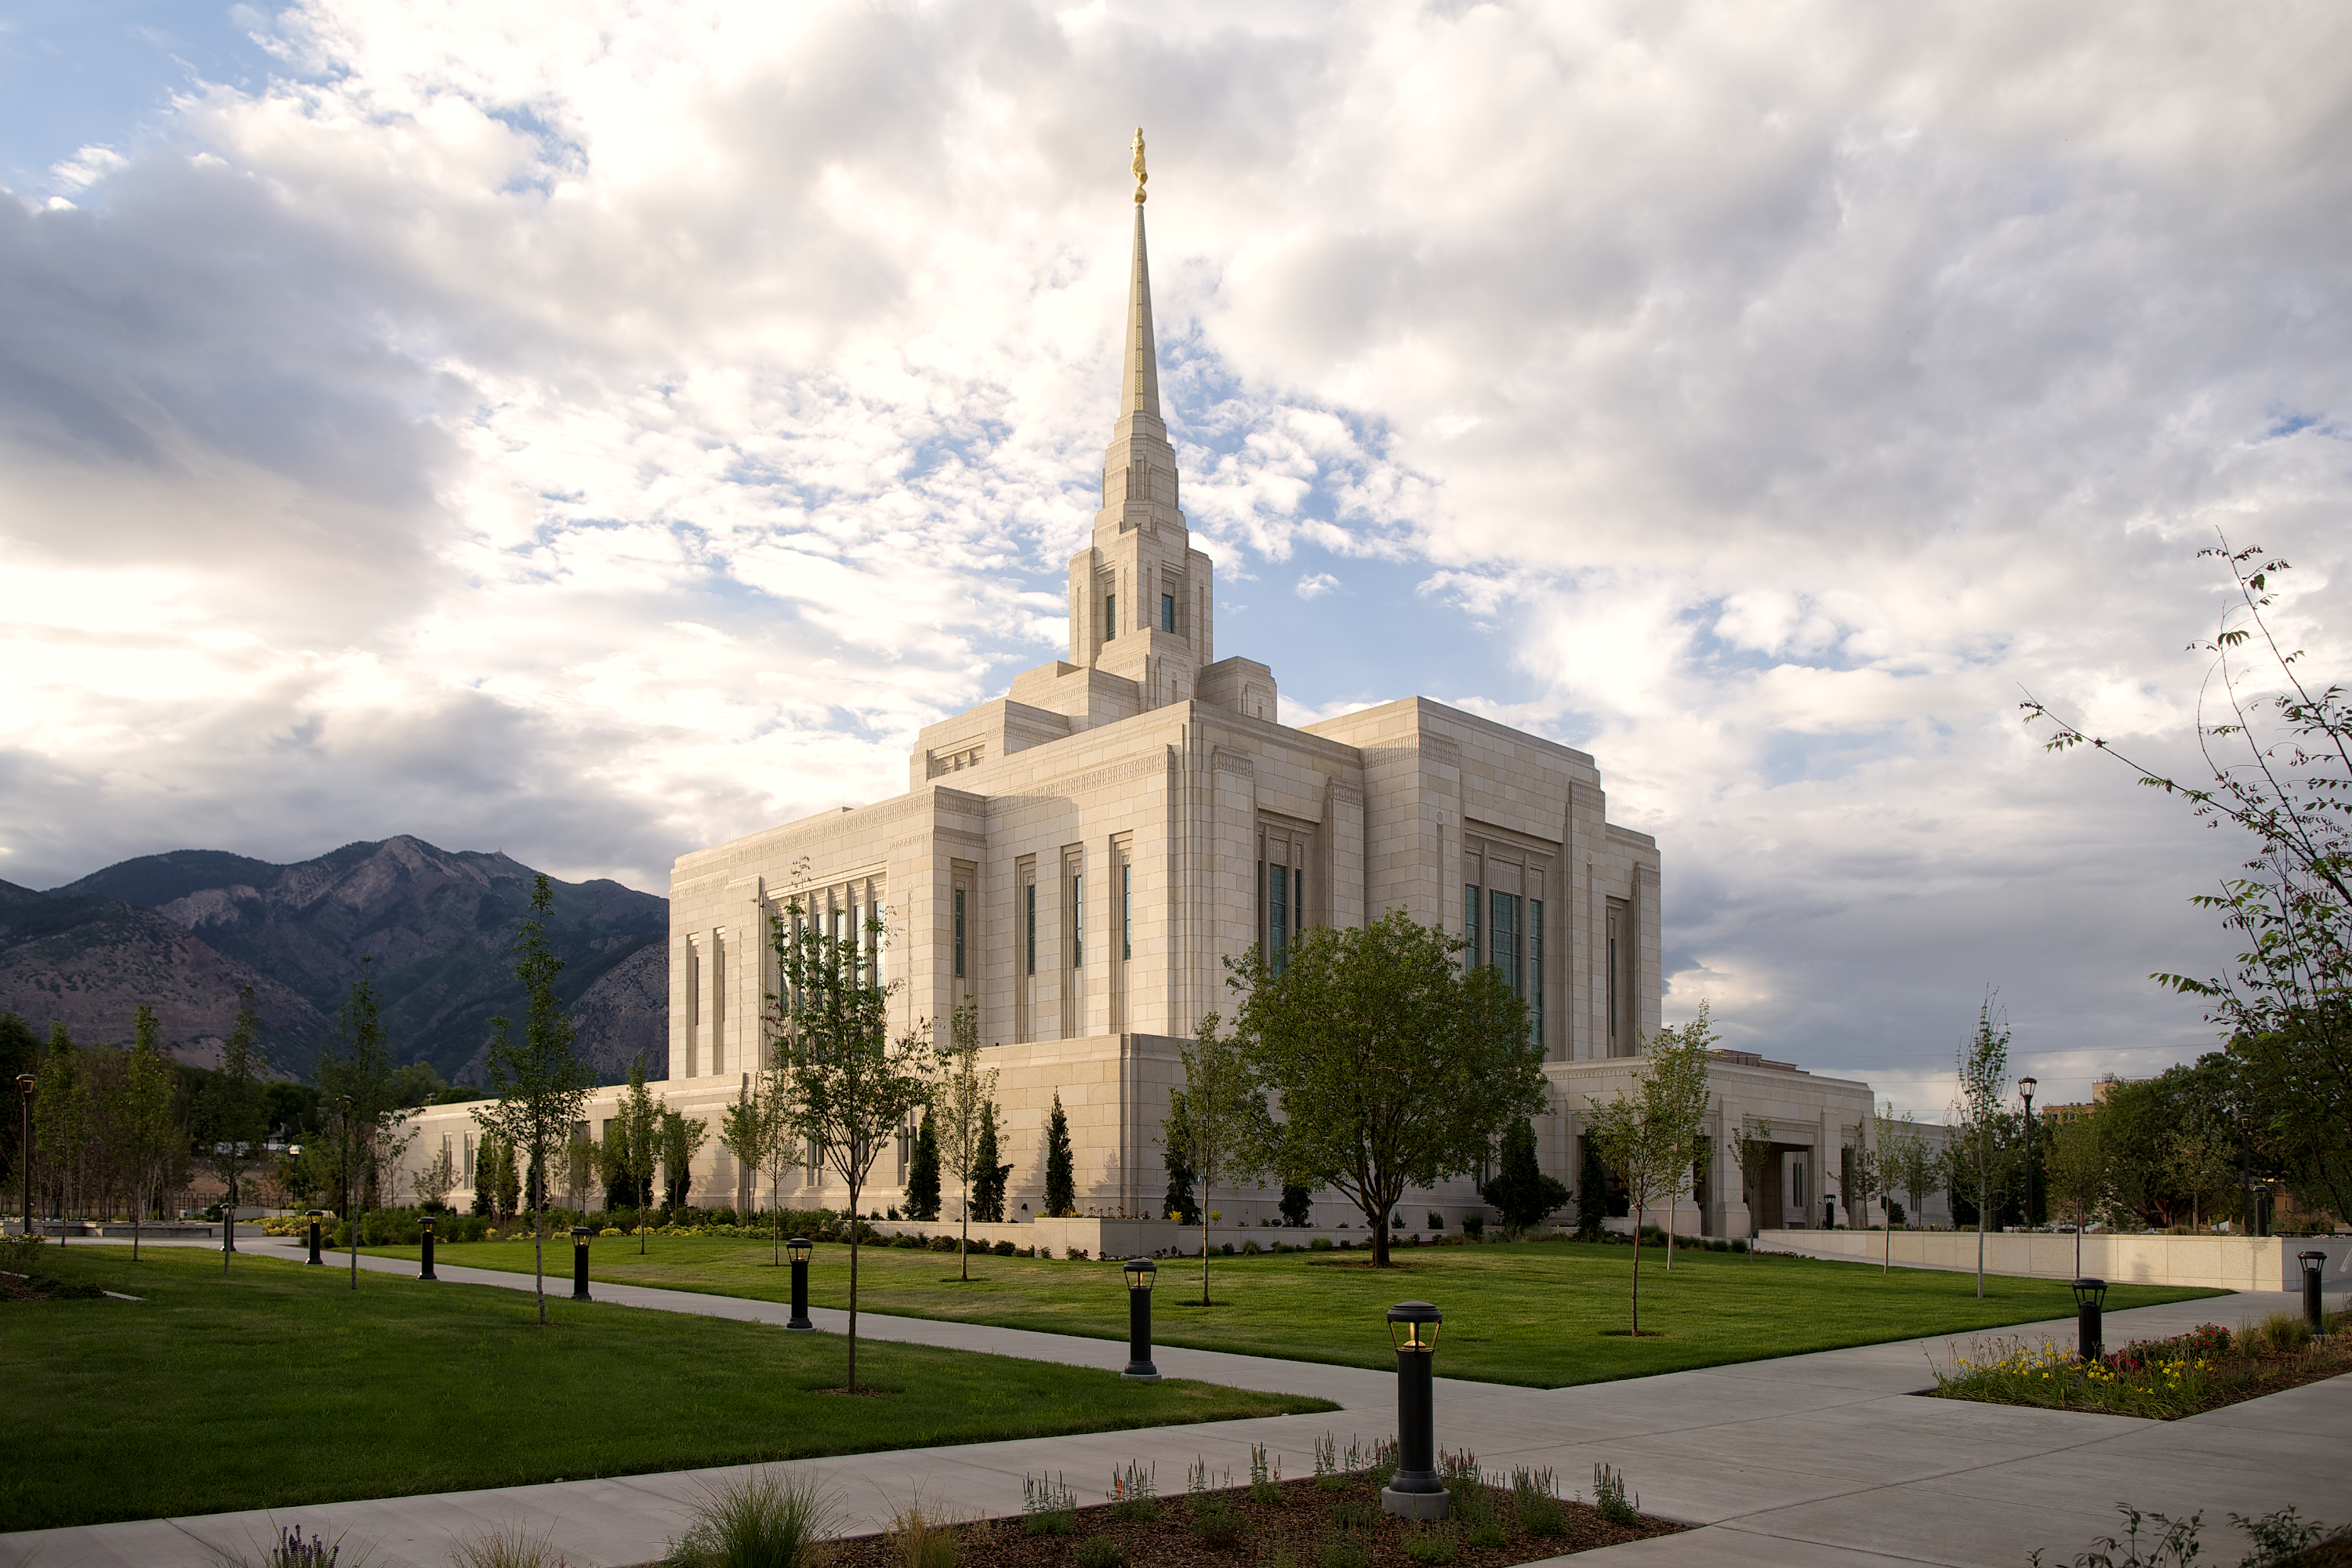 The exterior of the Ogden temple, a white, multilevel, blocky building with a center spire.